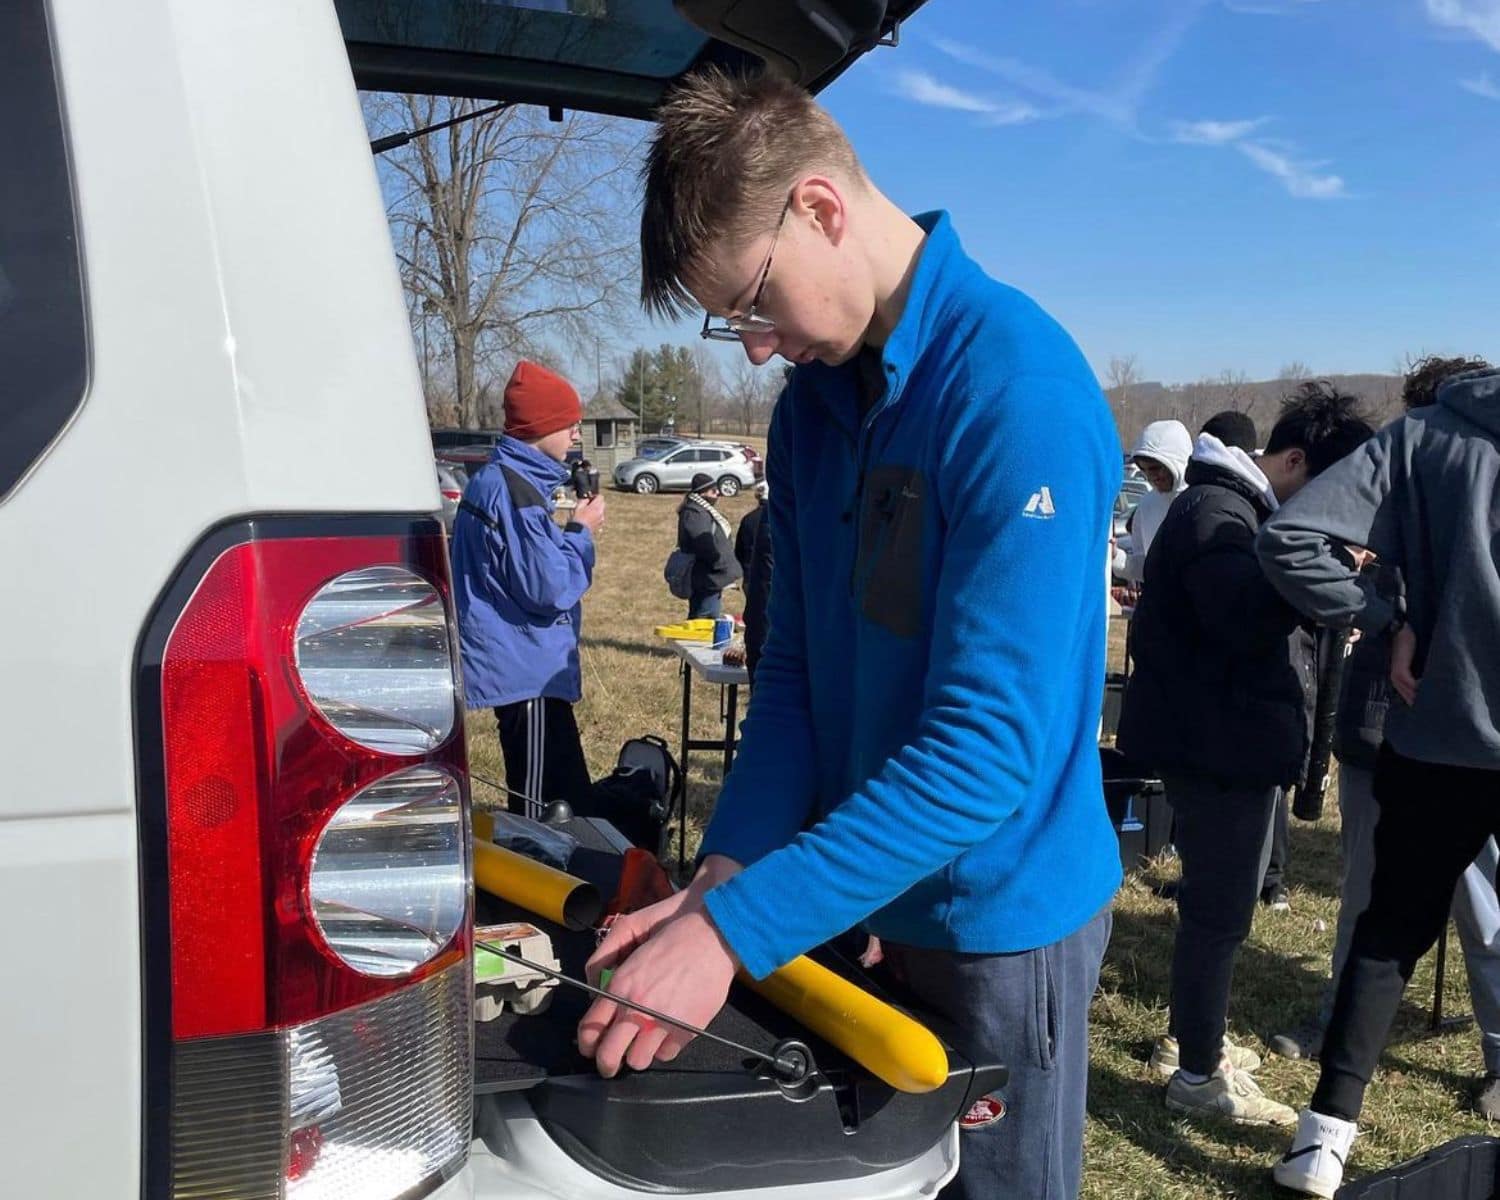 Aerospace Engineering student Ryan Shields was co-president of his rocket club in high school where he quality checked his team's rockets before launch.